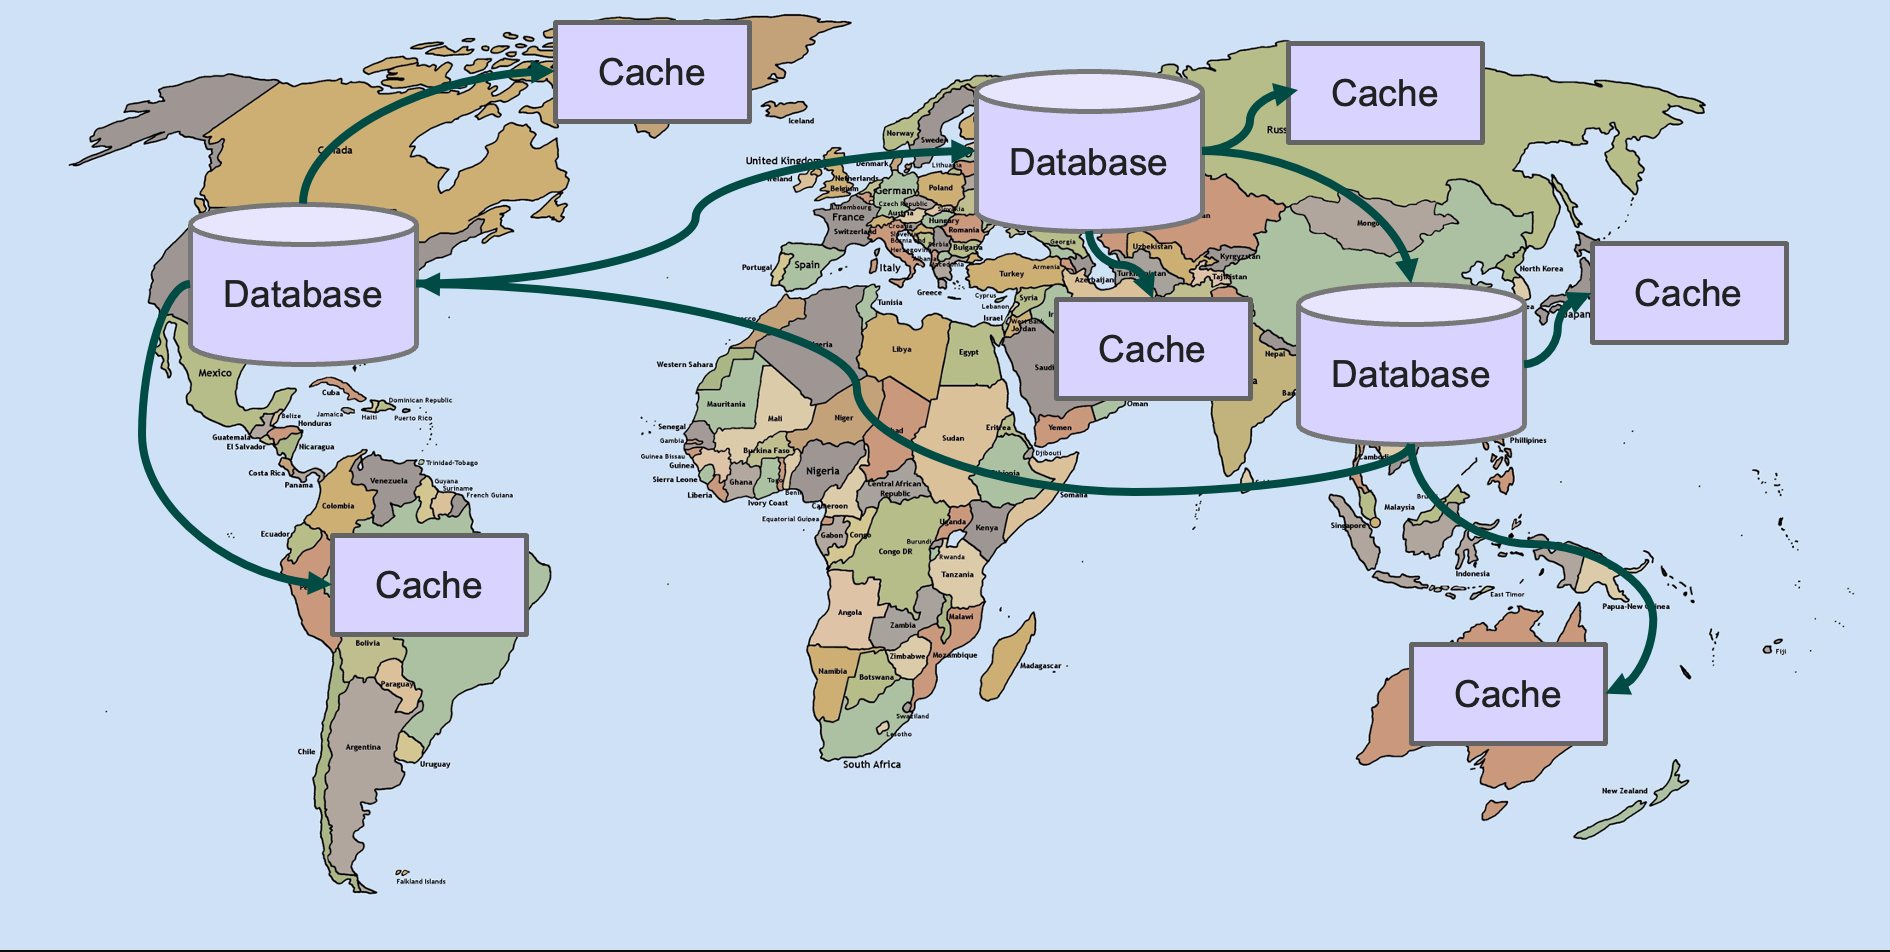 “Global DB with main datacenters and caches”